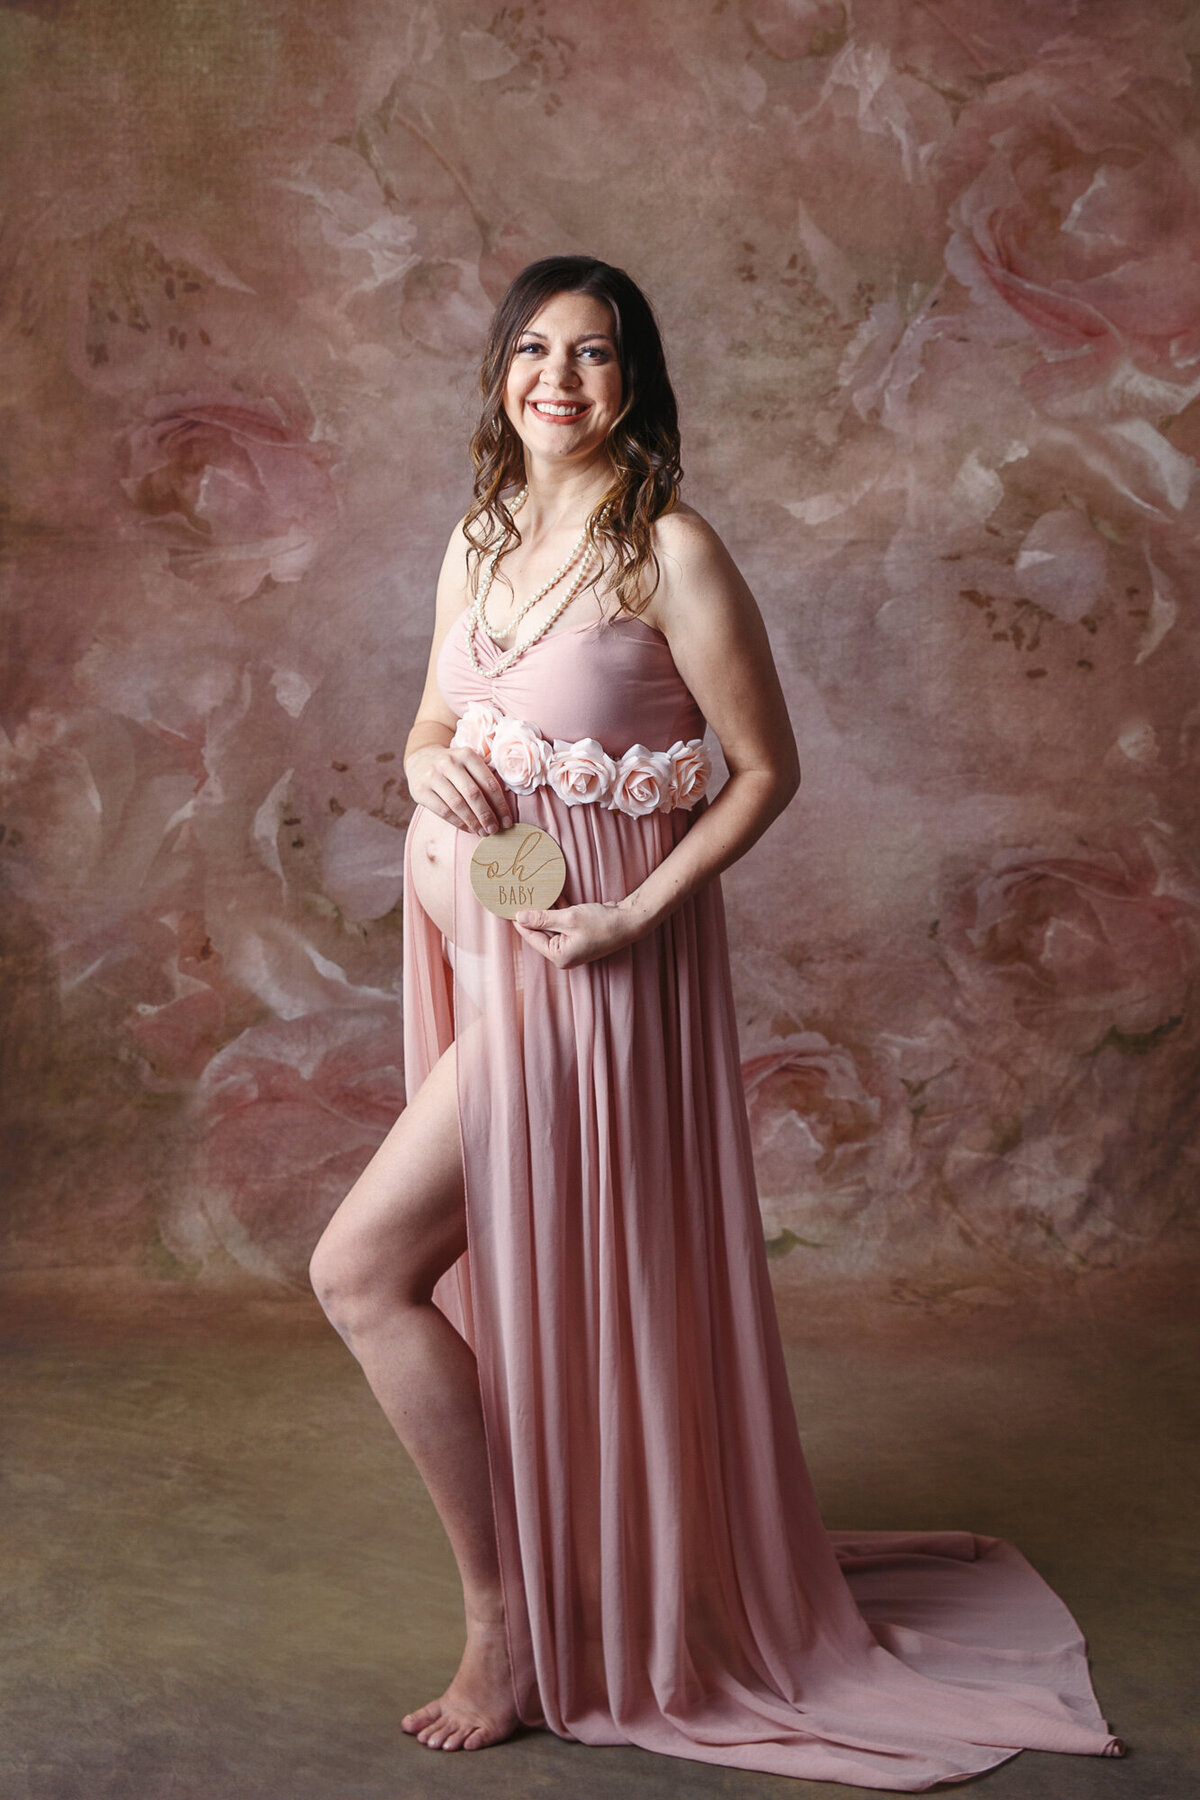 Pretty woman wearing a pink maternity dress and holding a oh baby sign smiling